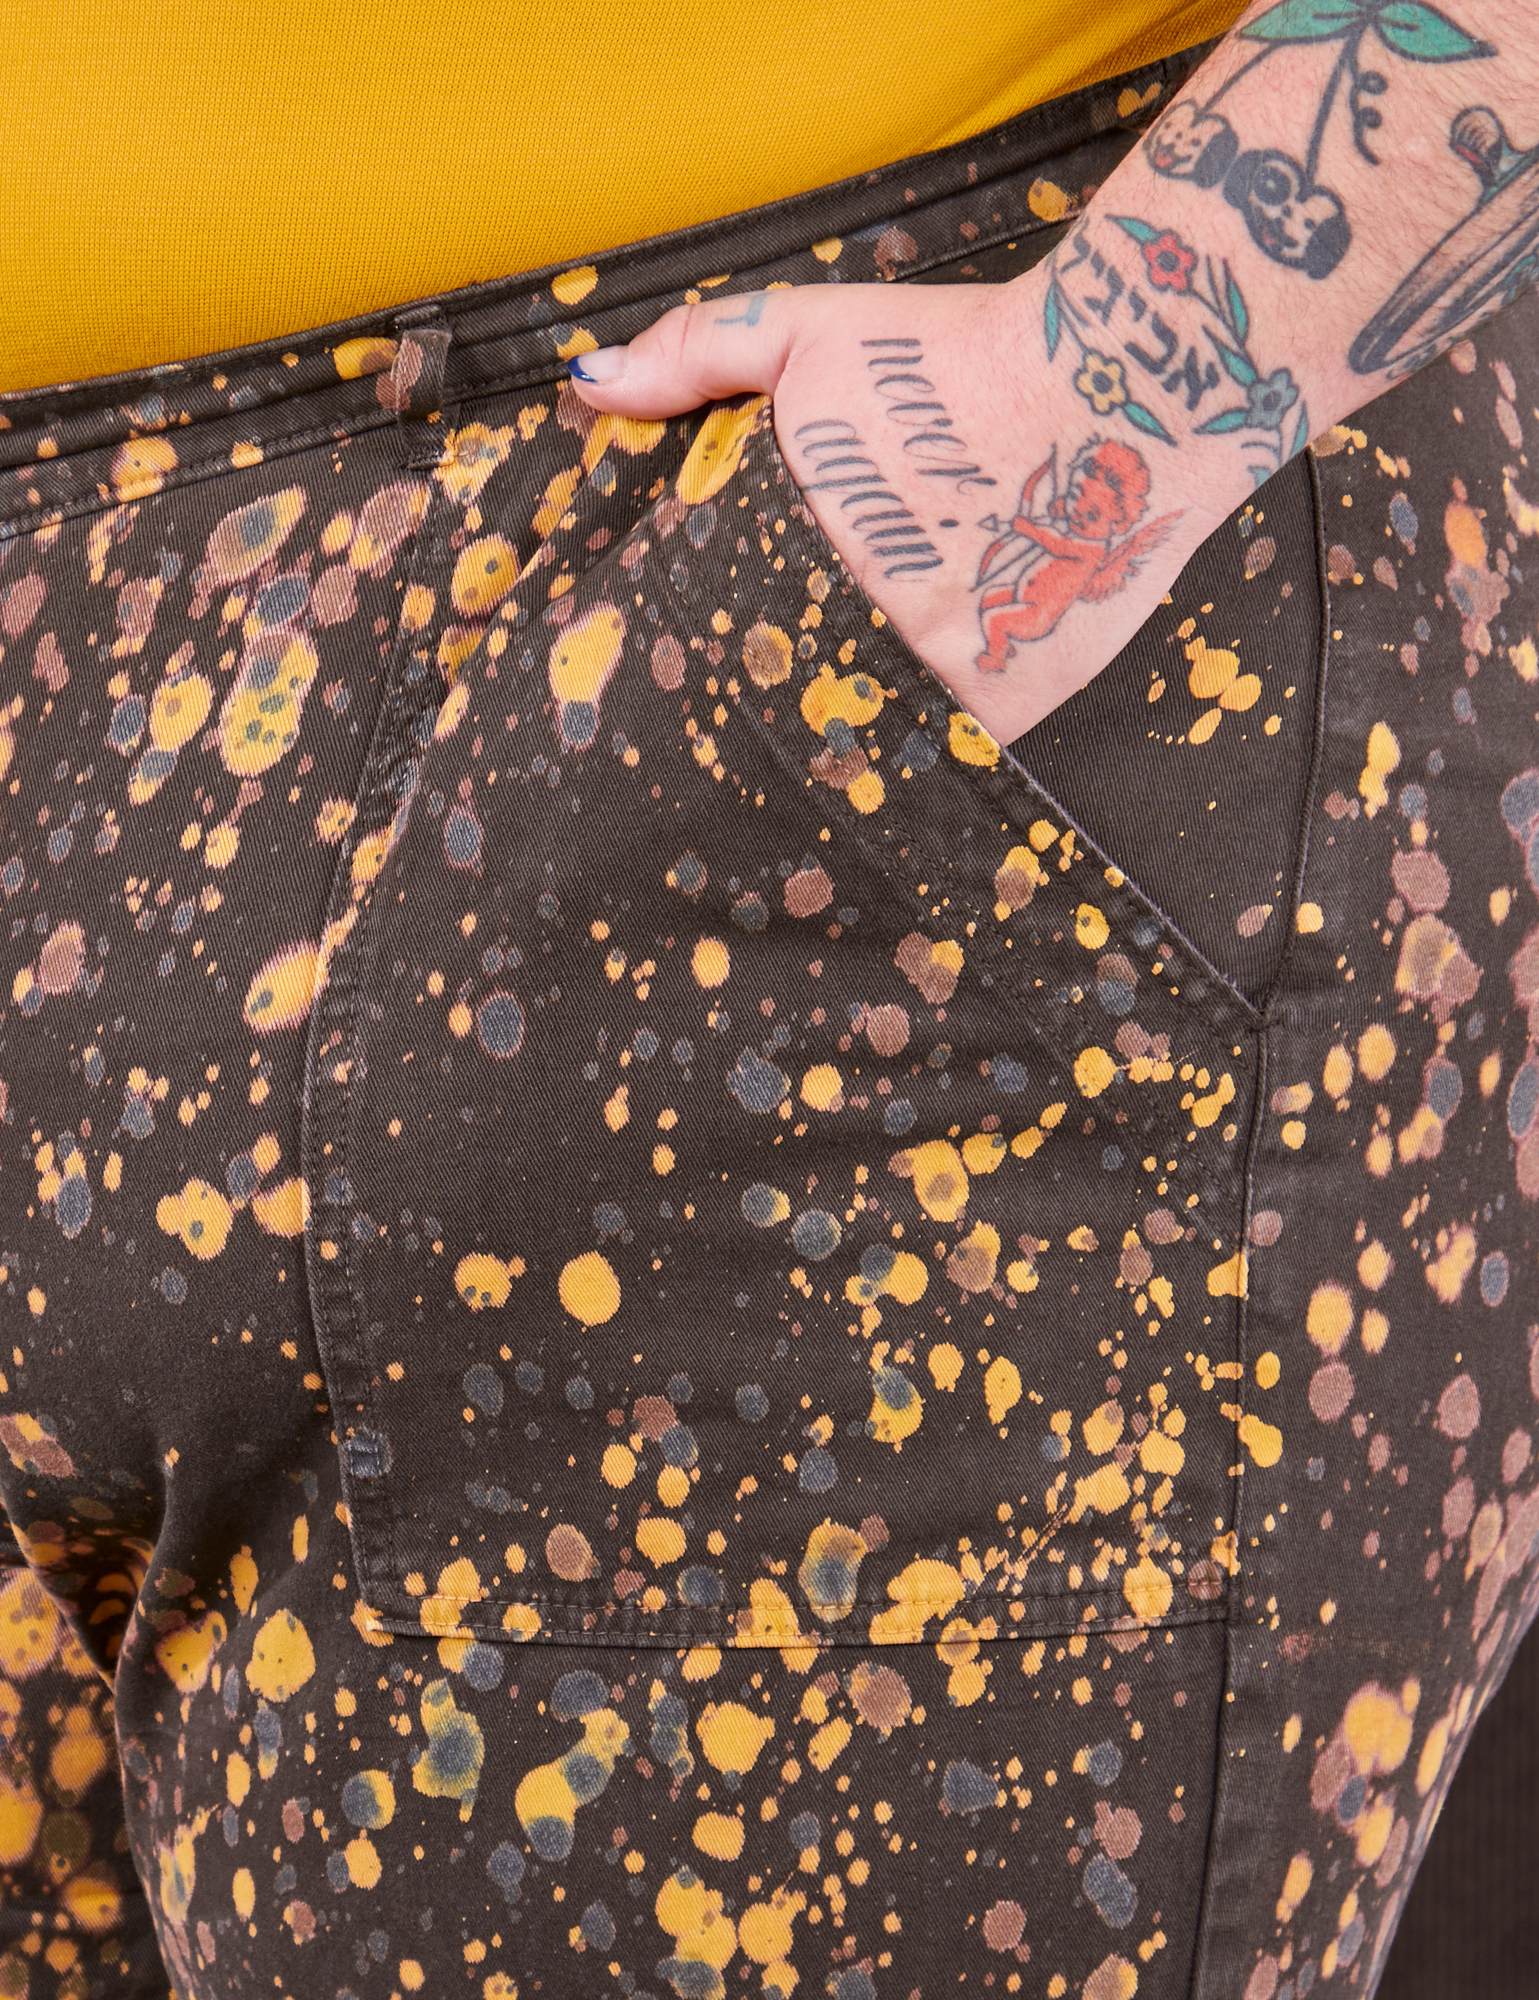 Marble Splatter Work Pants in Espresso Brown front pocket close up. Sam has their hand in the pocket.